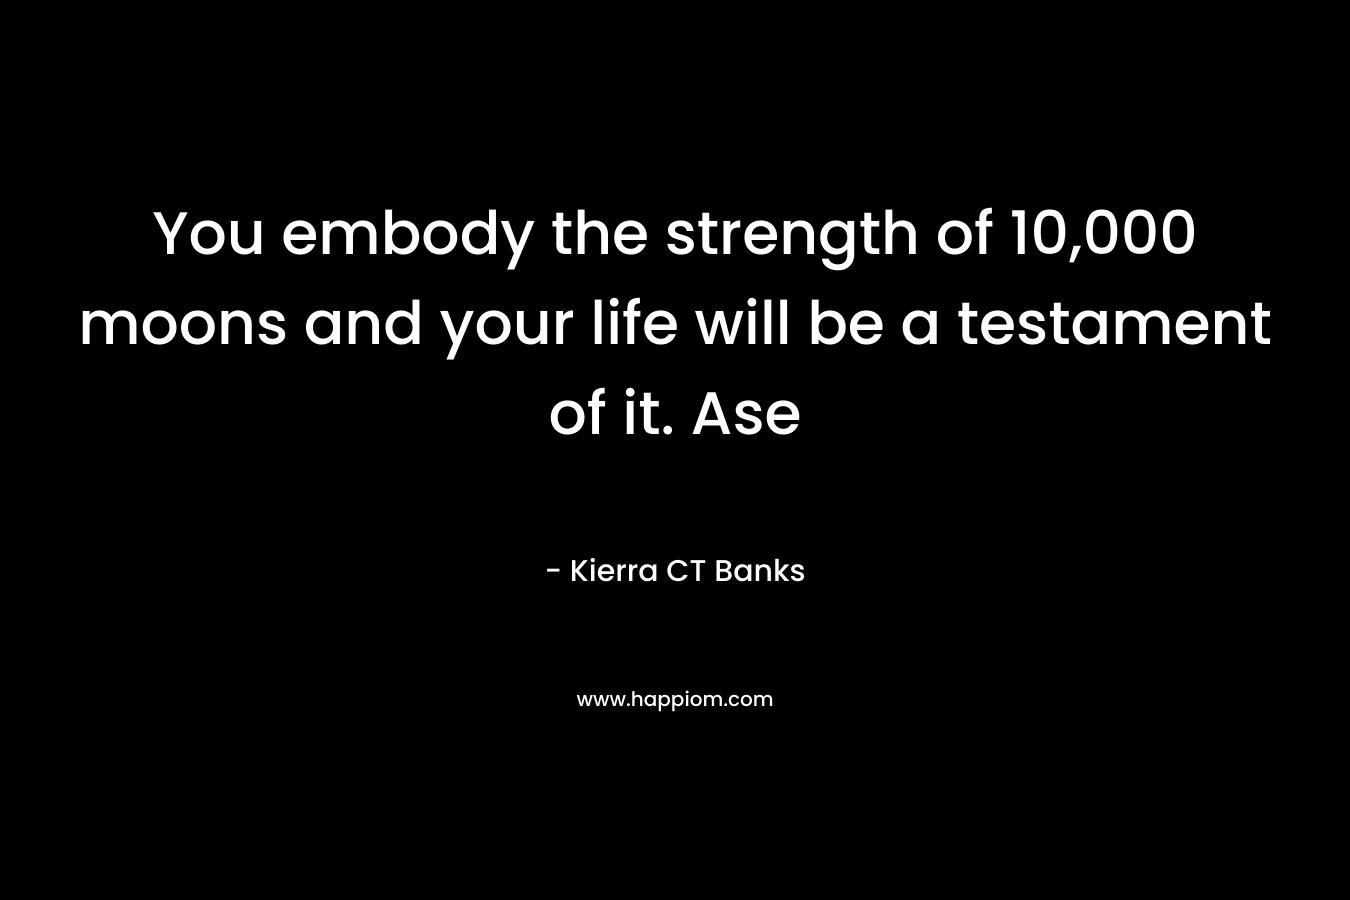 You embody the strength of 10,000 moons and your life will be a testament of it. Ase